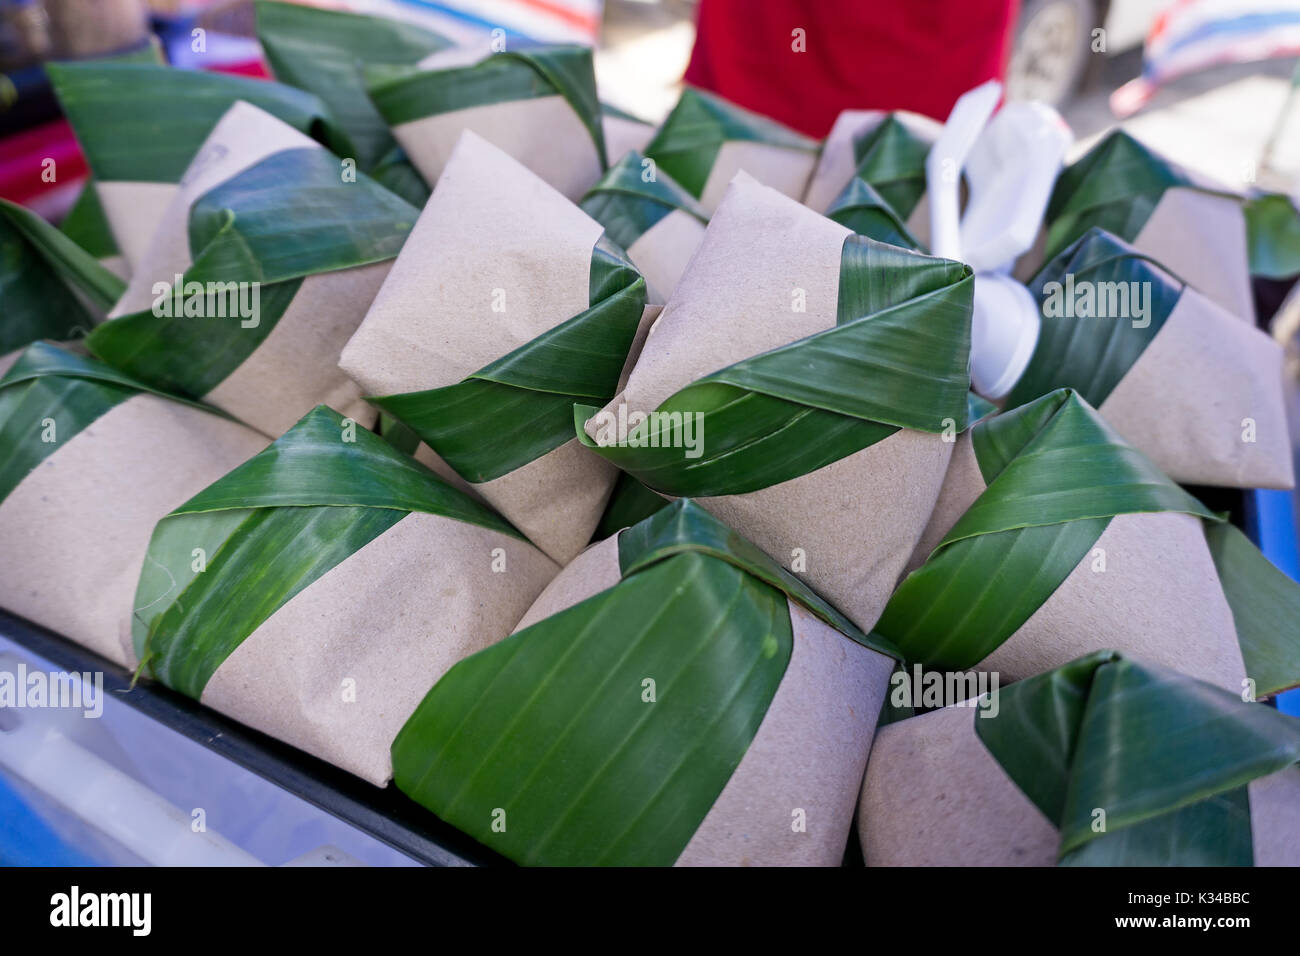 Nasi Lemak Wrapped With Banana Leaves And Paper For Sell In Kota